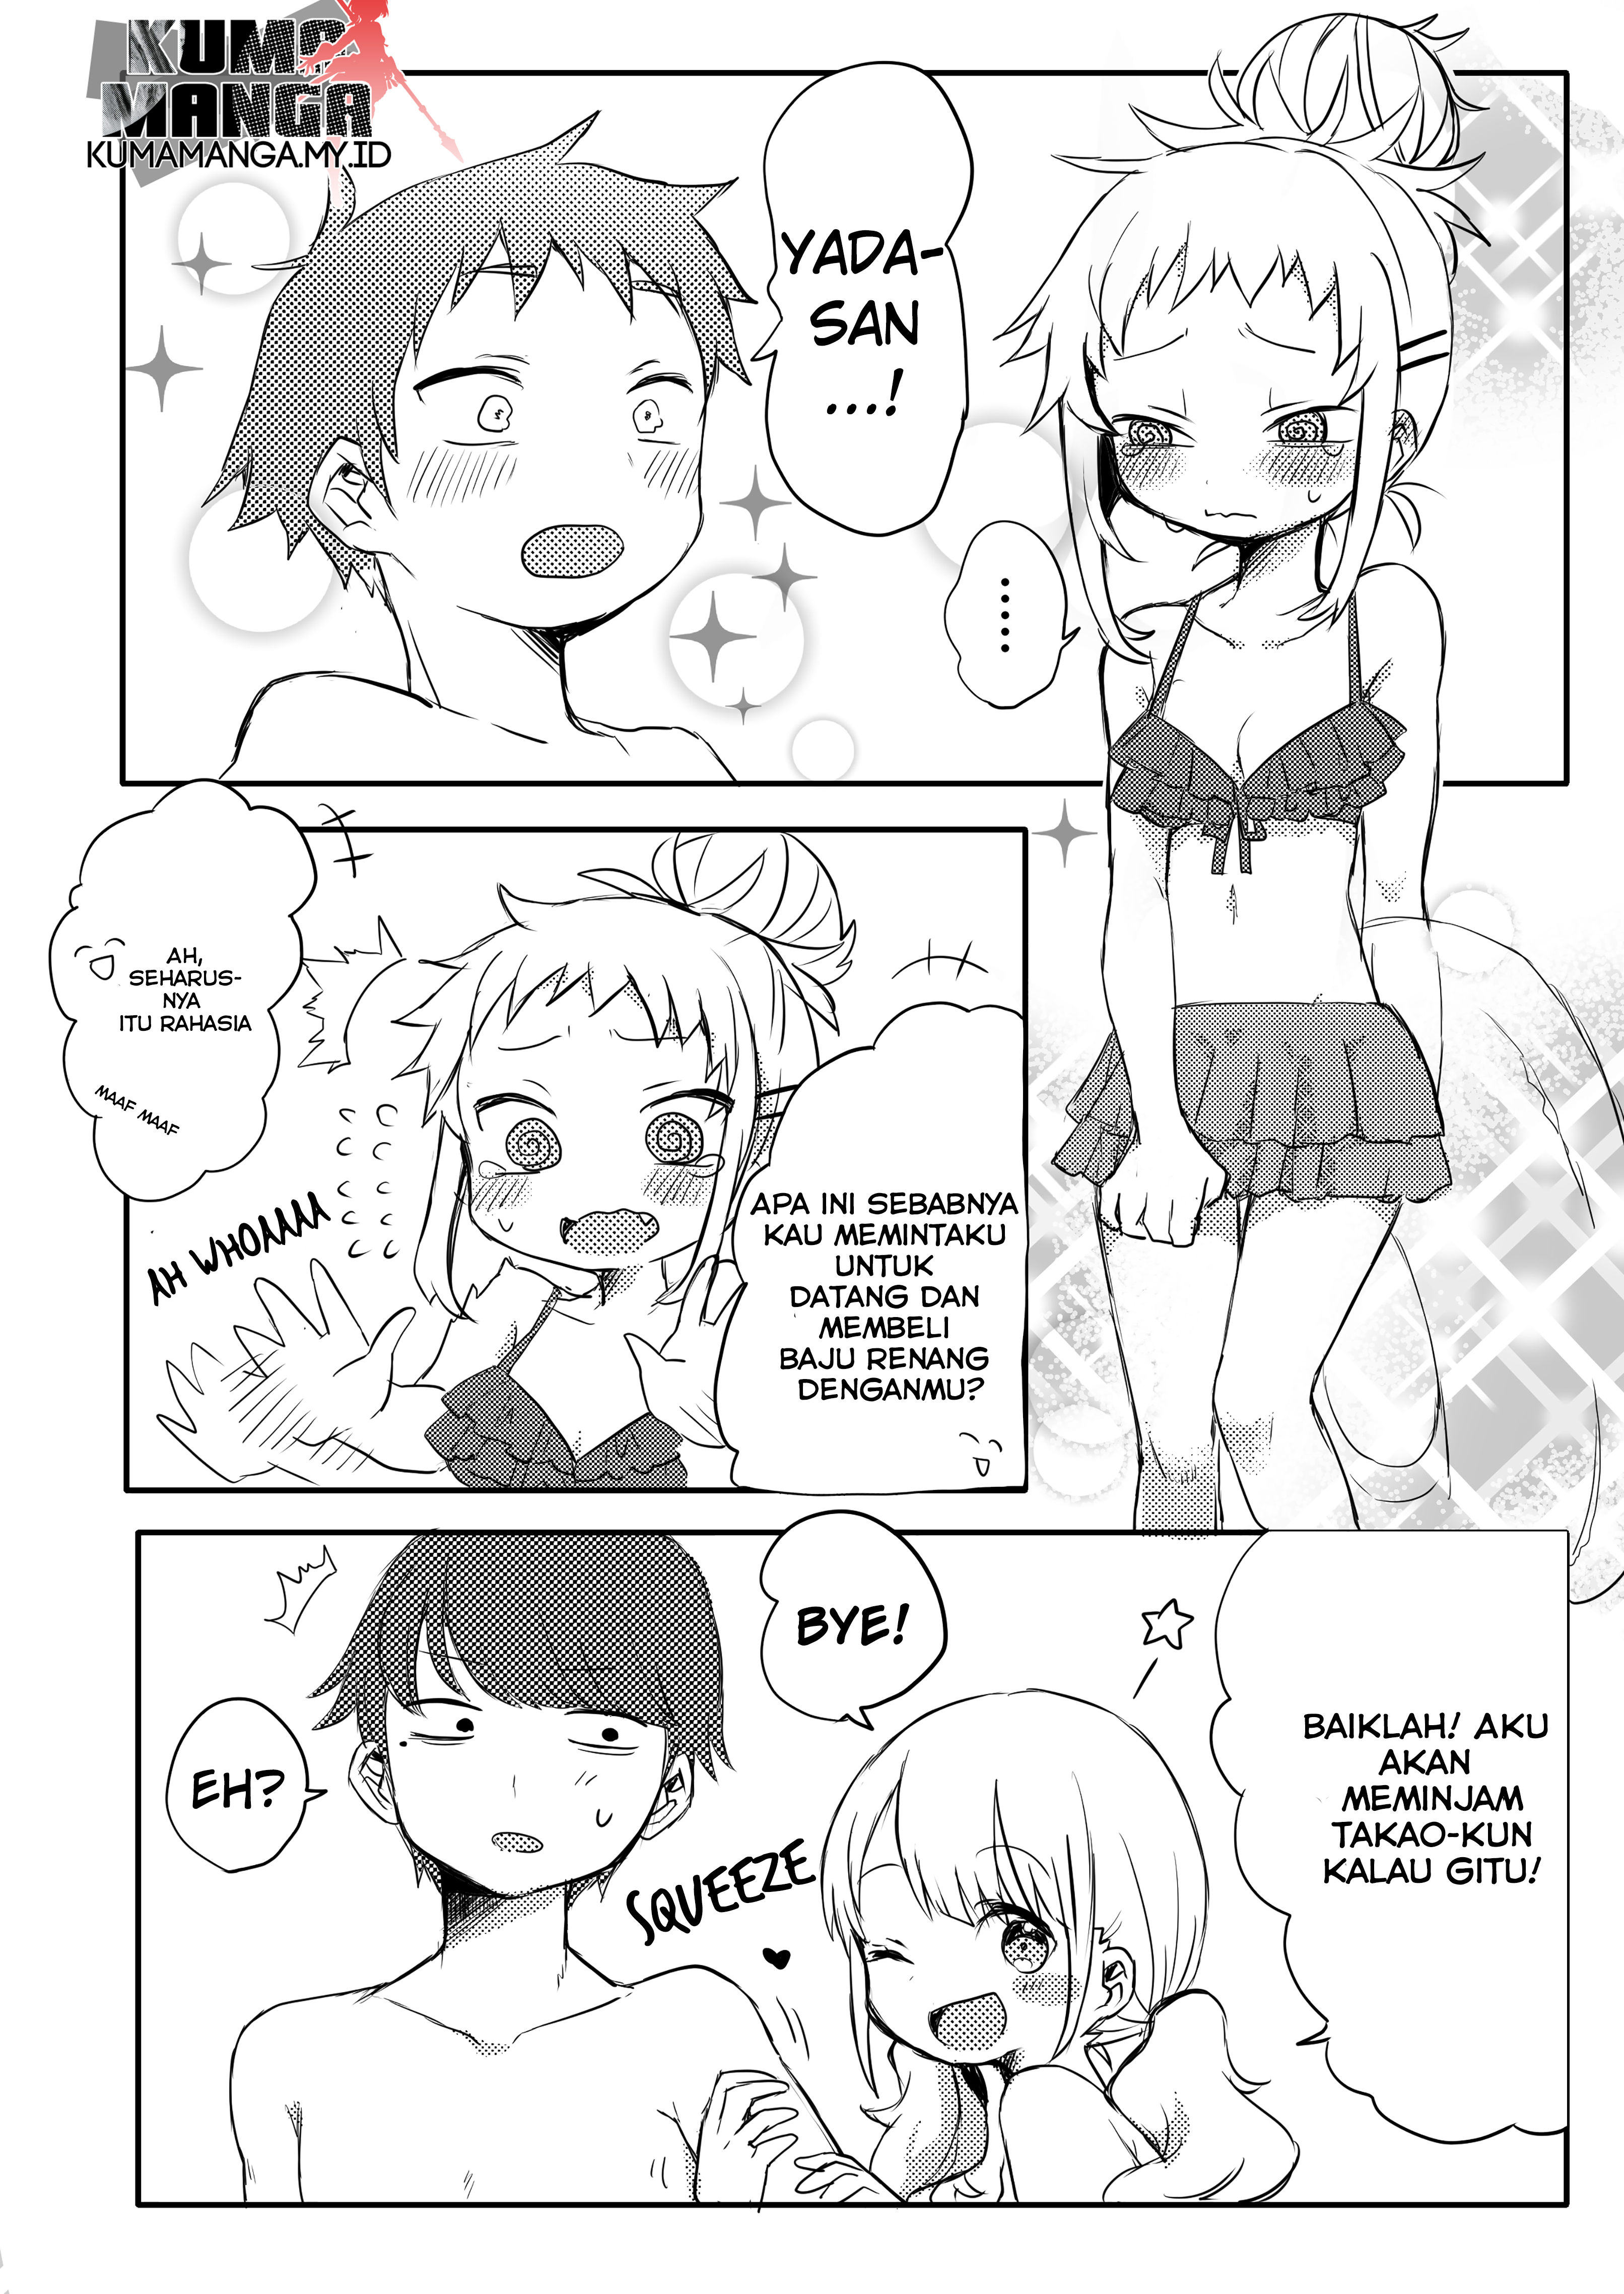 Yada-san Is Cold Chapter 4